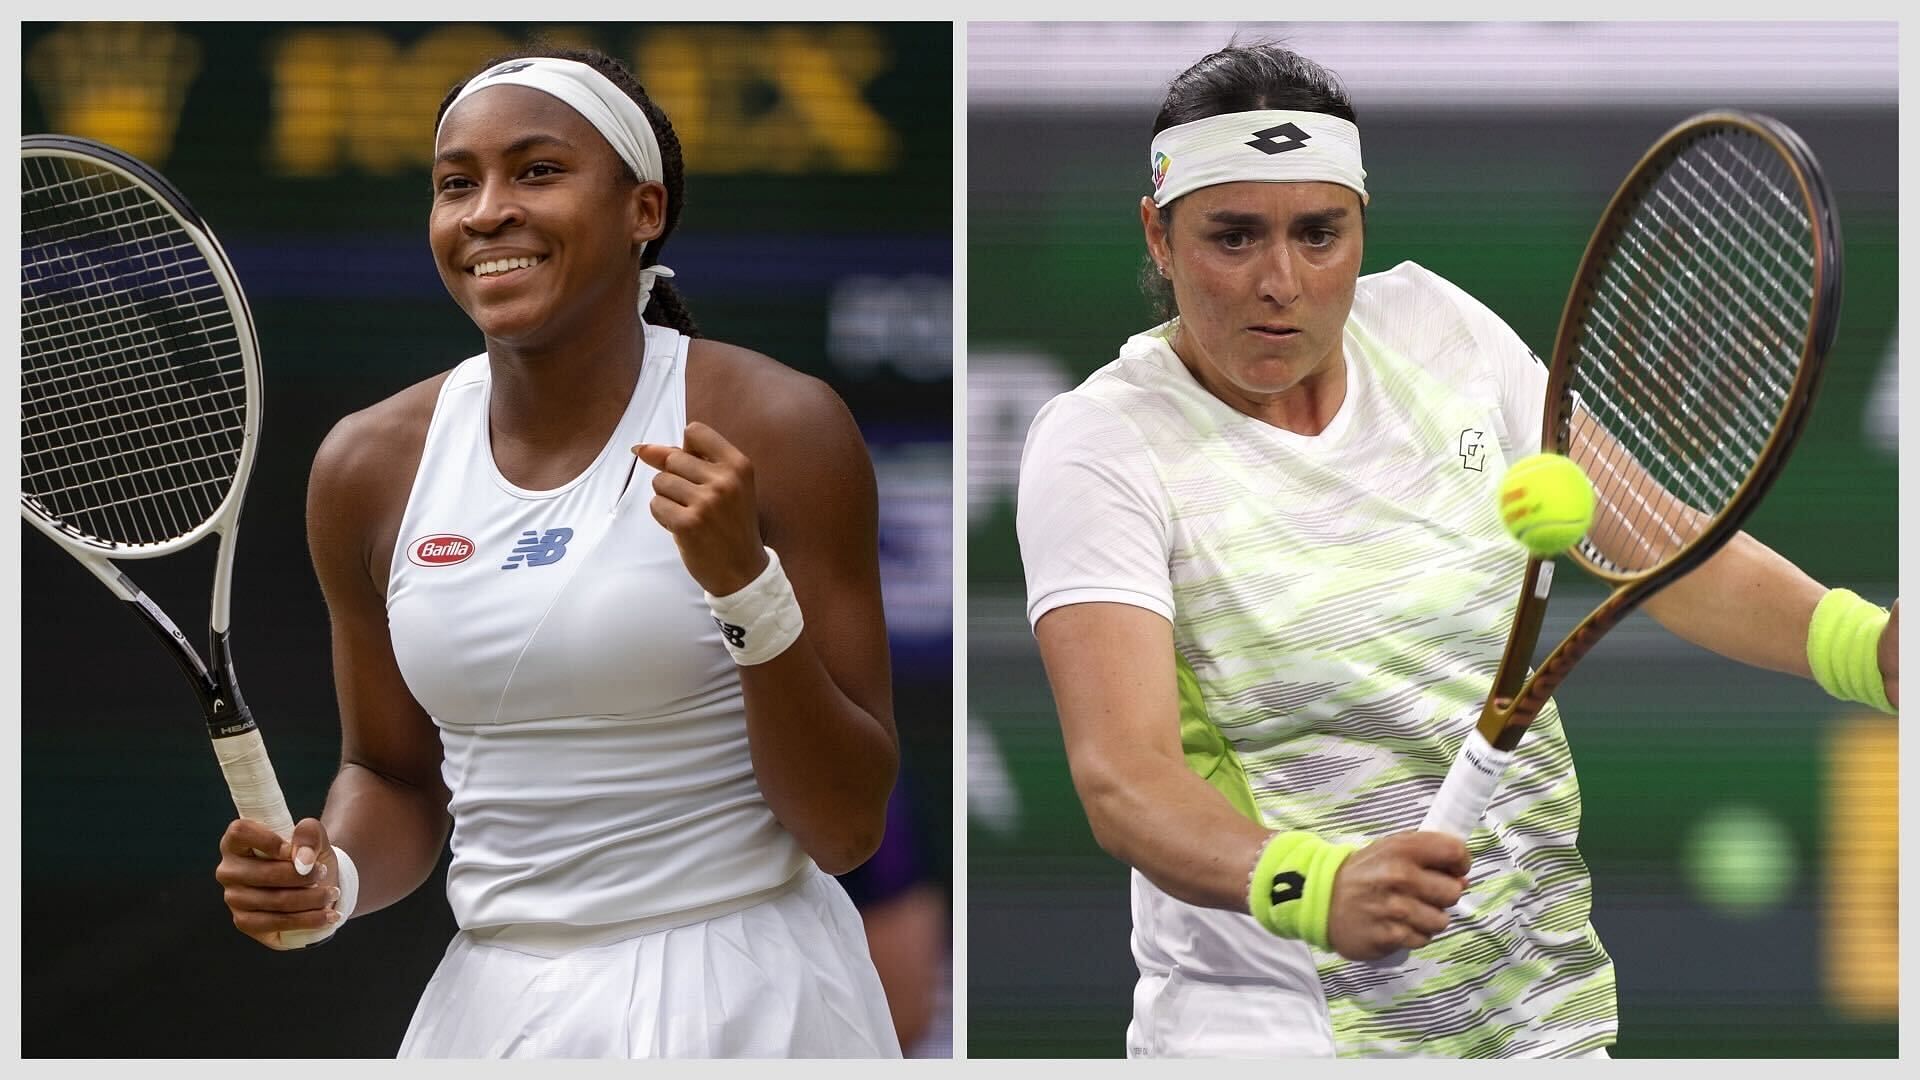 Coco Gauff vs Ons Jabeur is one of the round-robin matches at the 2023 WTA Finals.